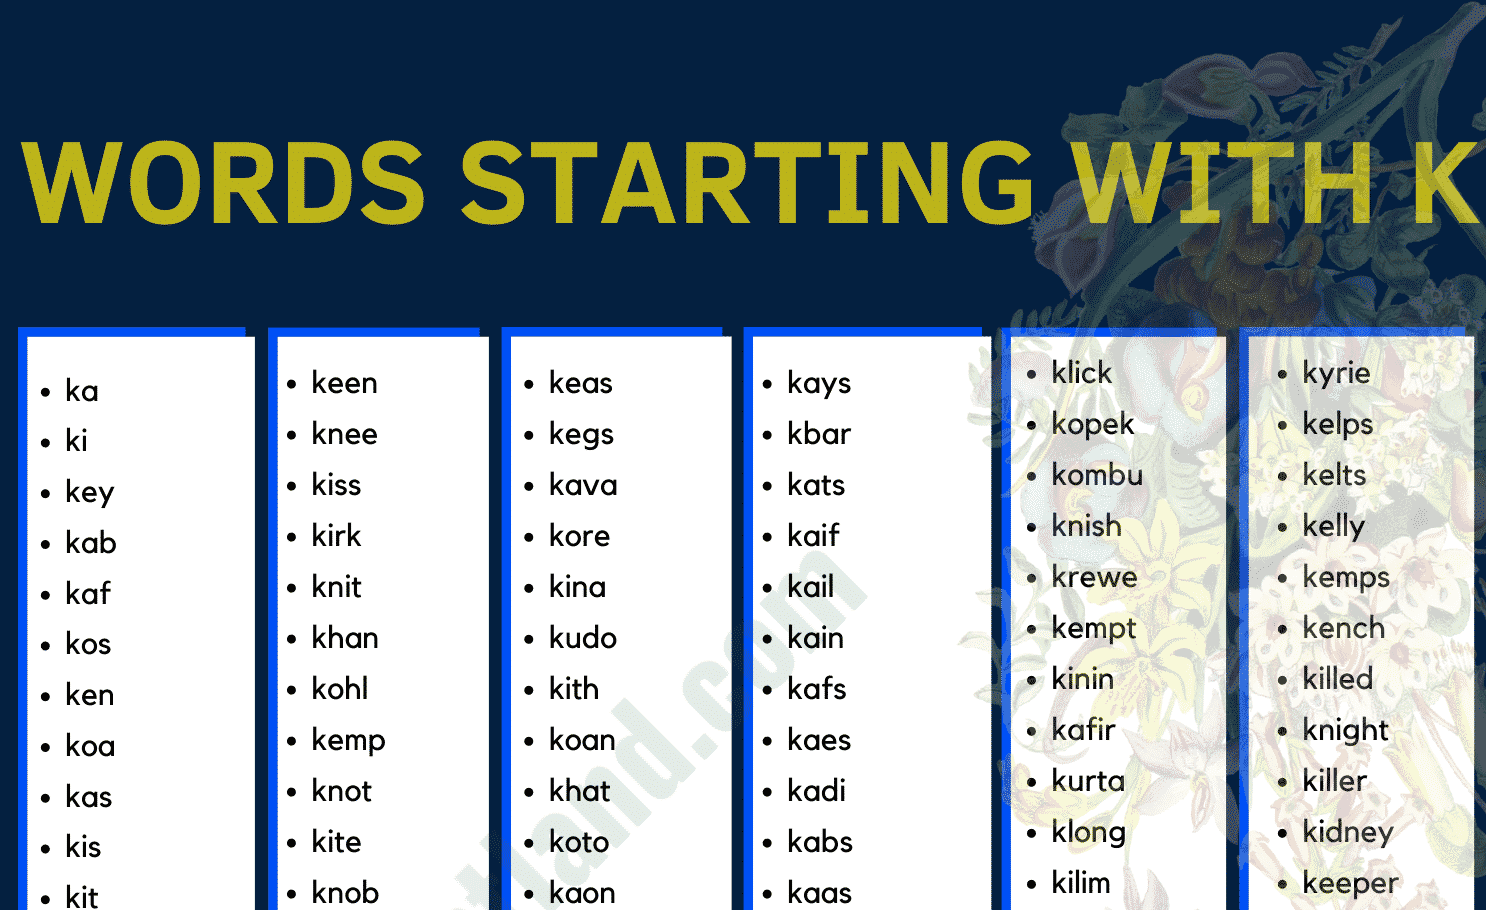 Words That Start With Ken